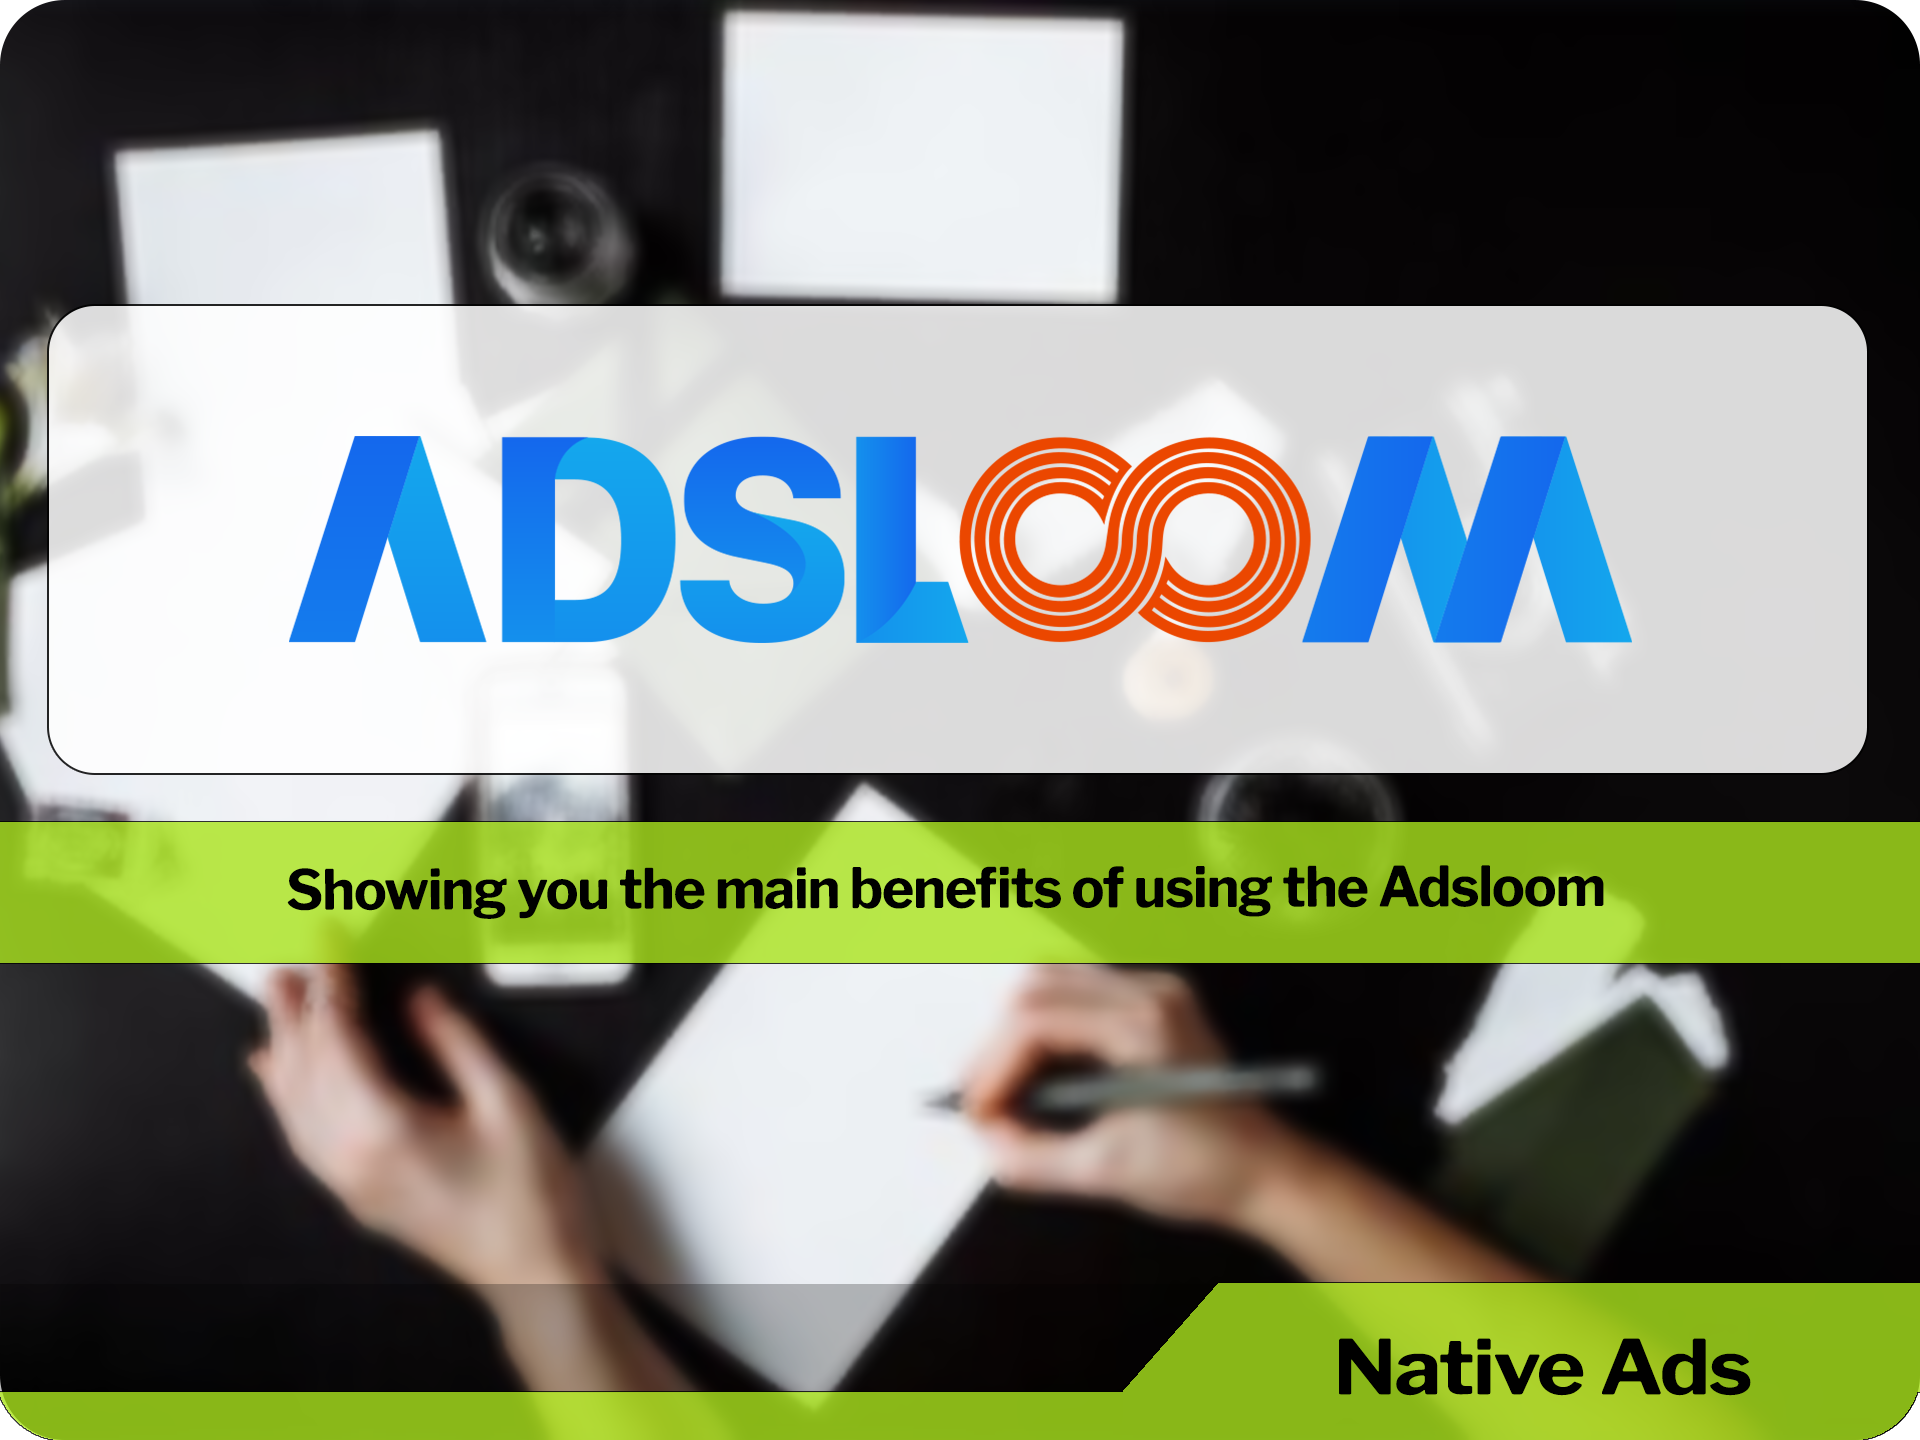 Here are the main benefits of using the Adsloom